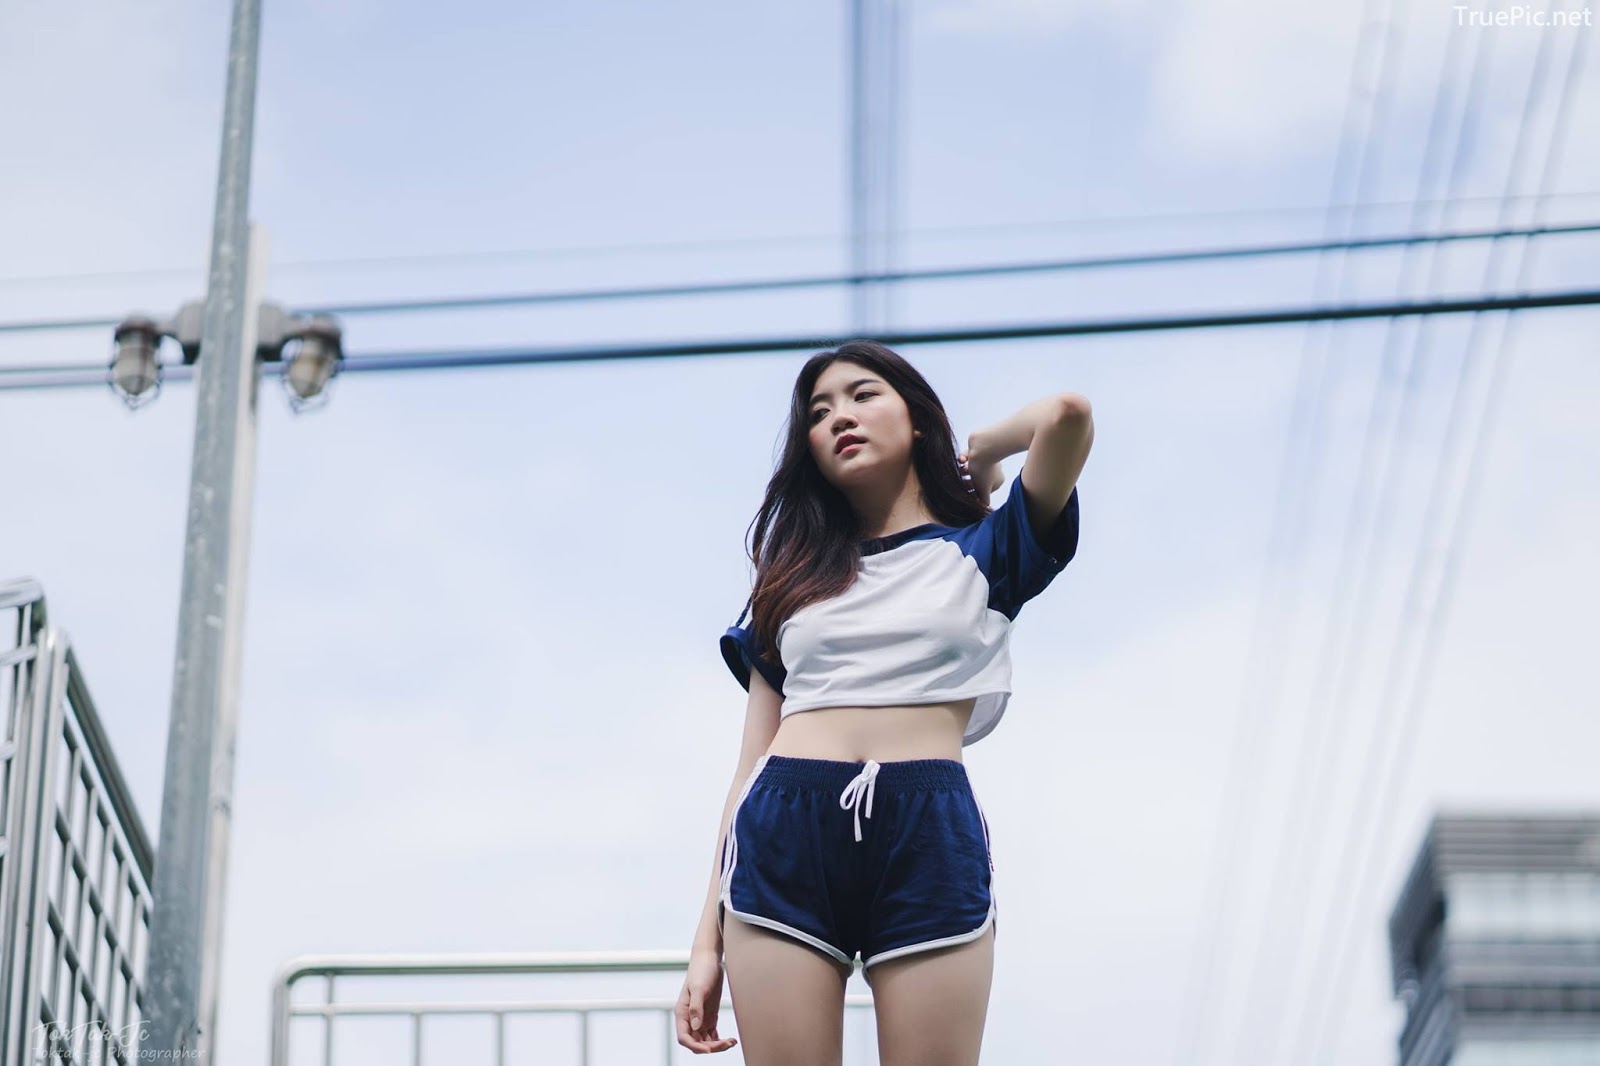 Hot Girl Thailand - Sasi Ngiunwan - Scenes From an Empty City - TruePic.net - Picture 43